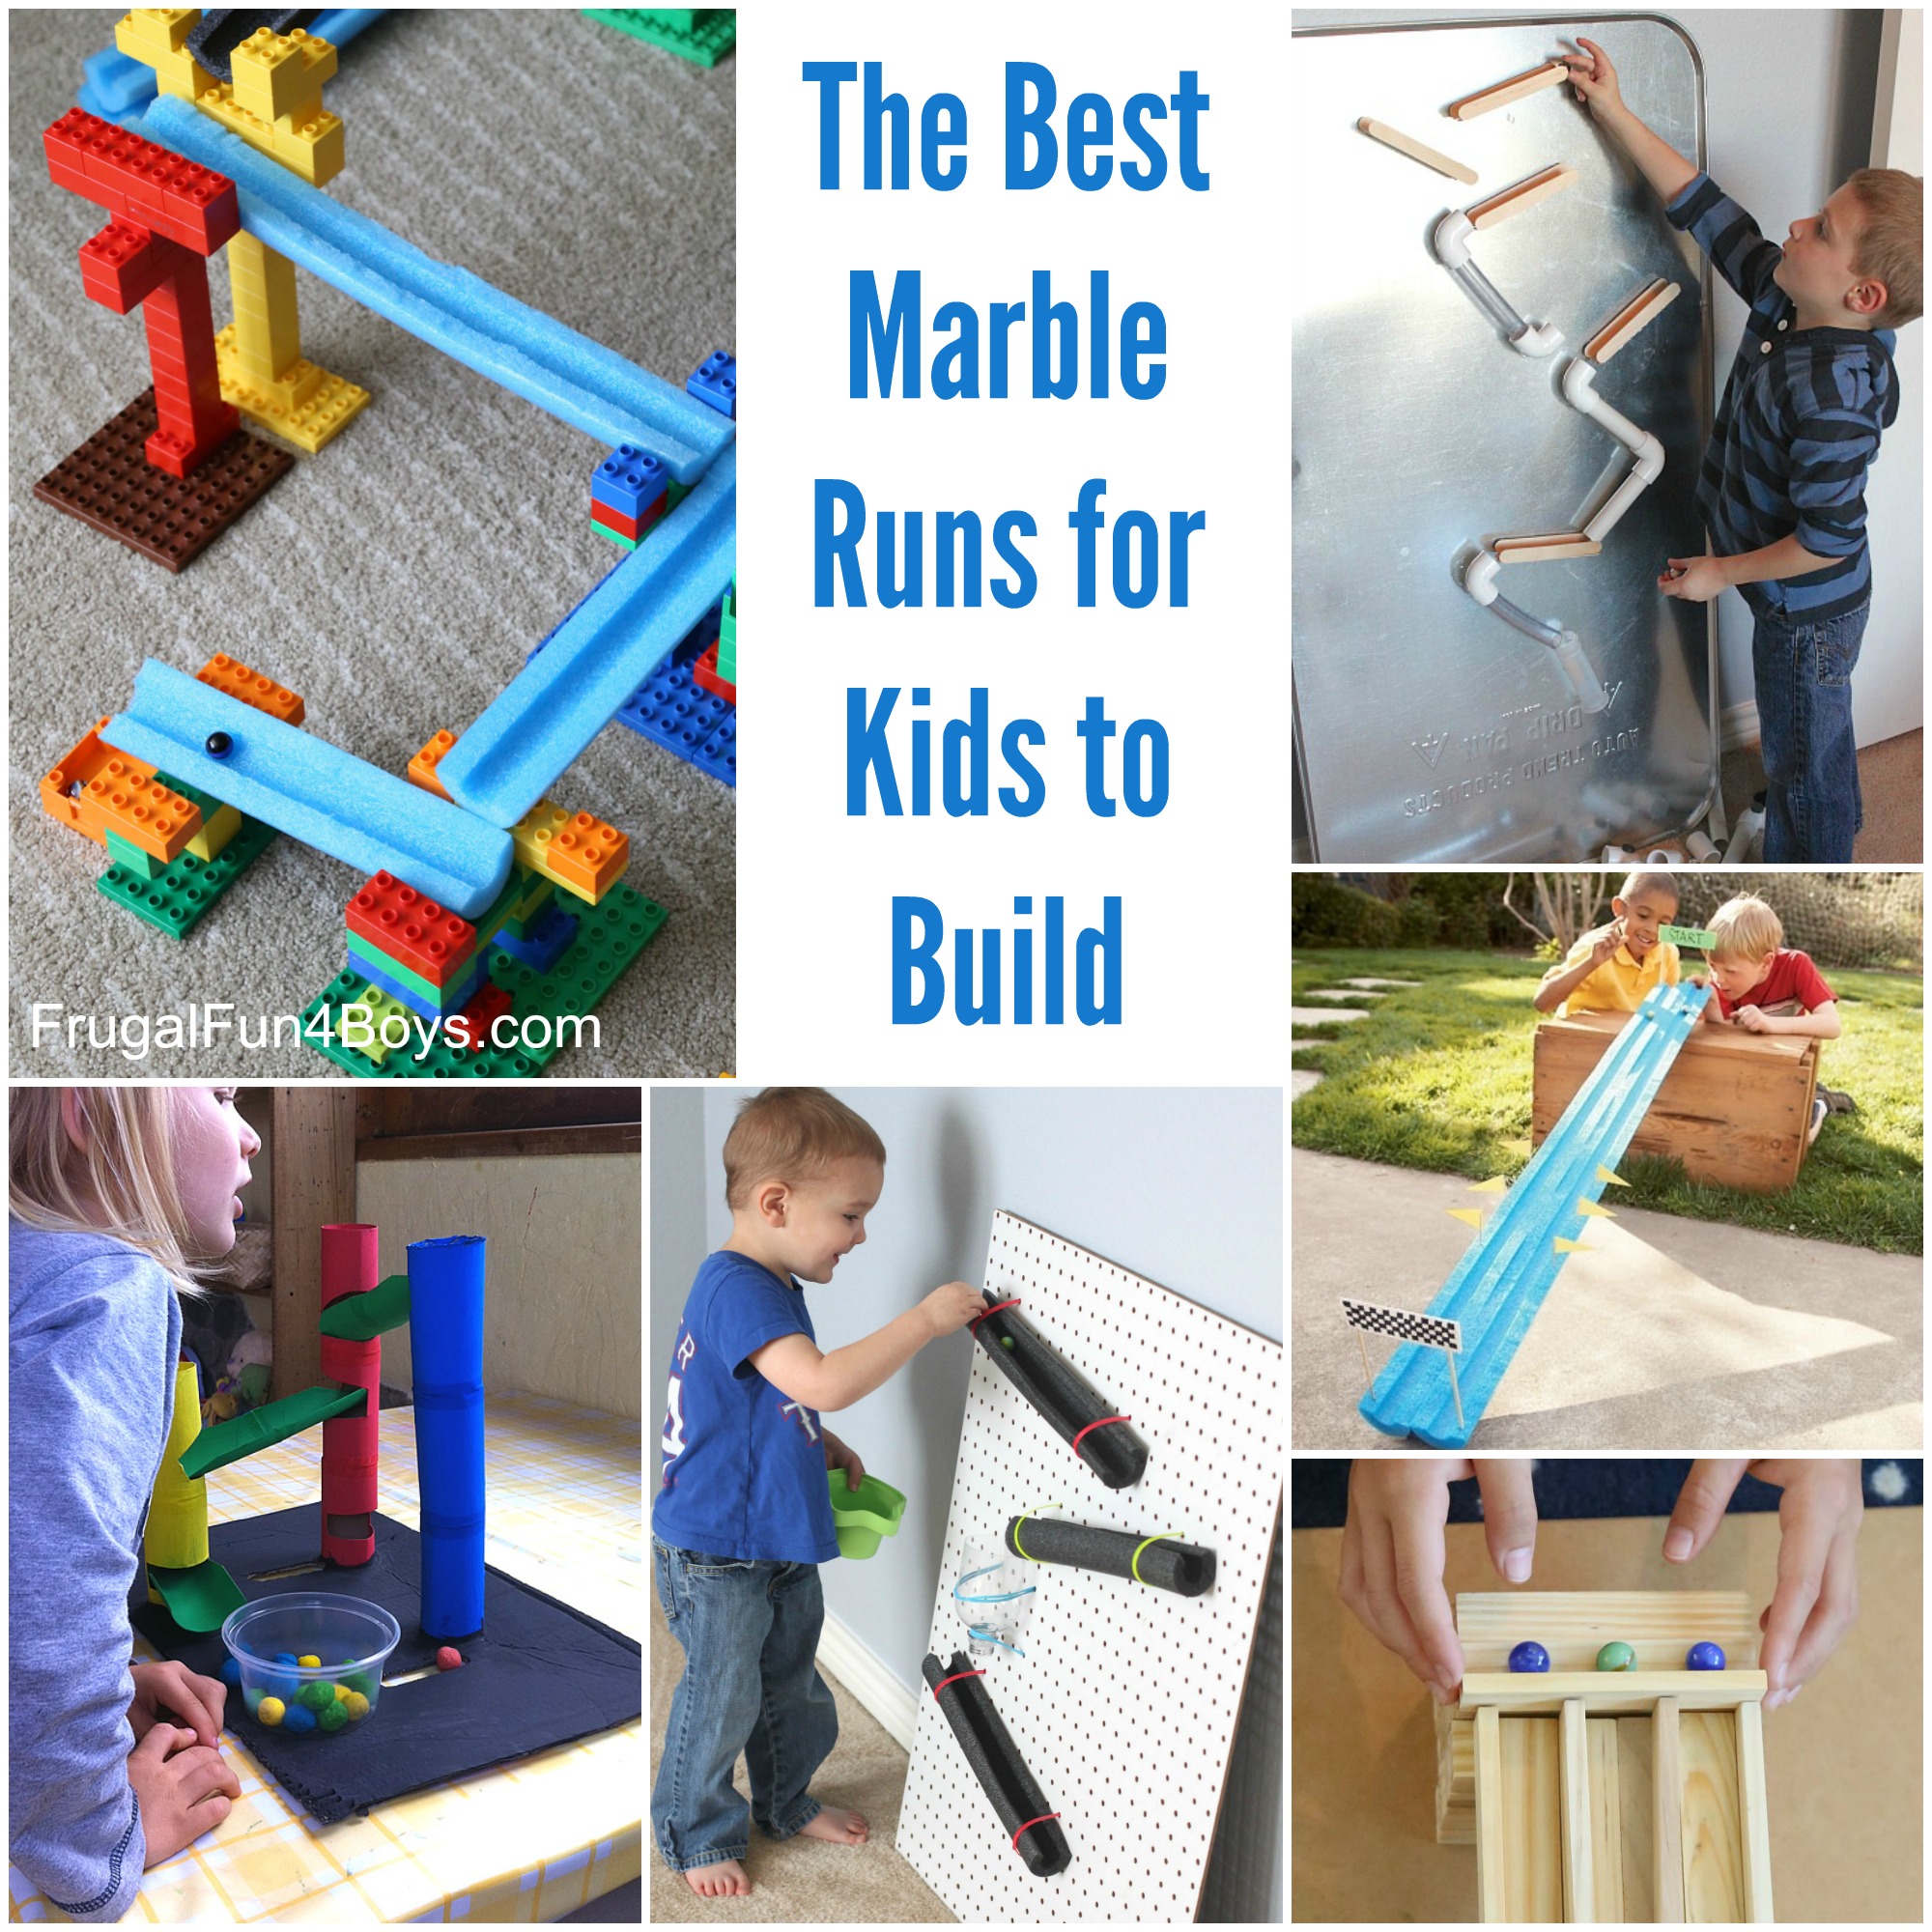 The BEST Marble Runs for Kids to Build